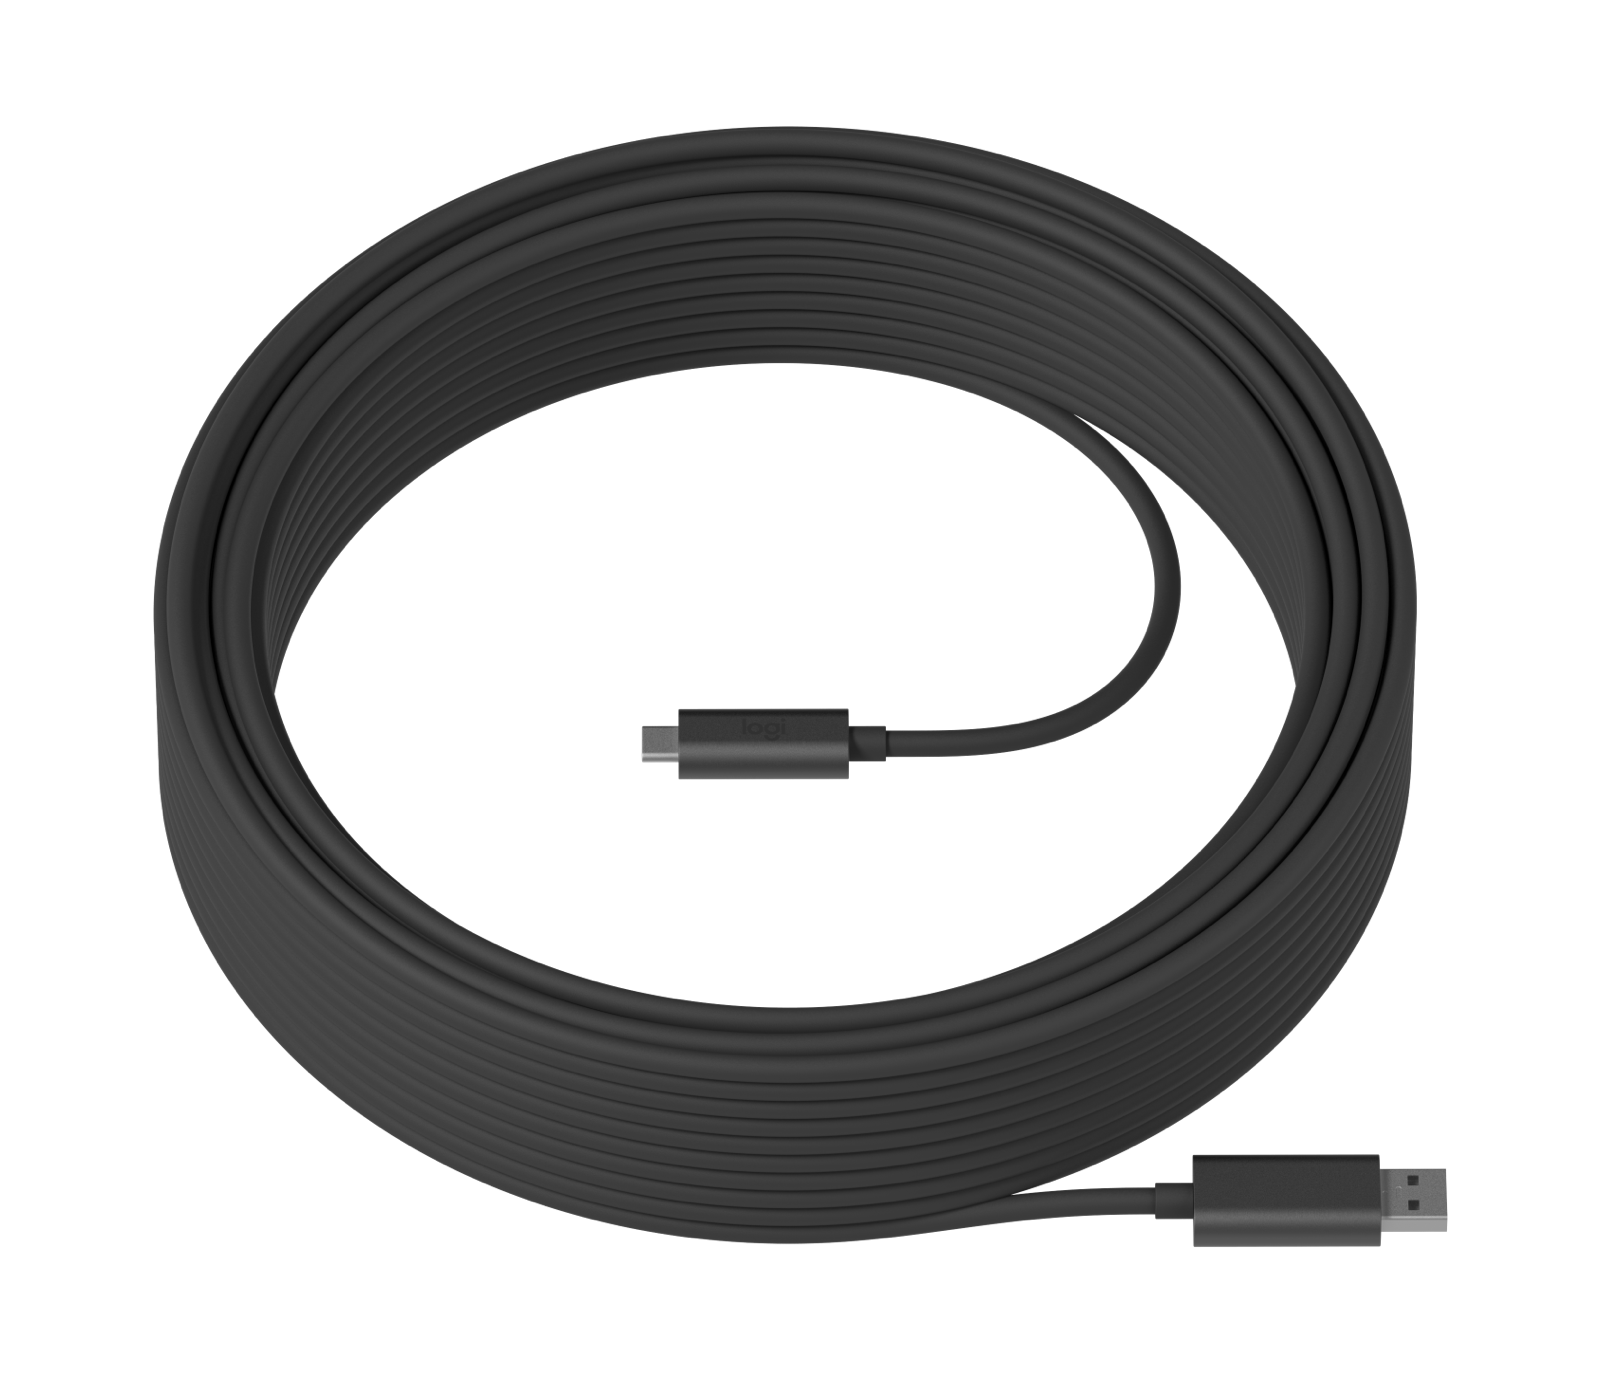 Image of Logitech Strong USB Extended-length SuperSpeed USB 10 Gbps cable - Dark Grey 45 Meter